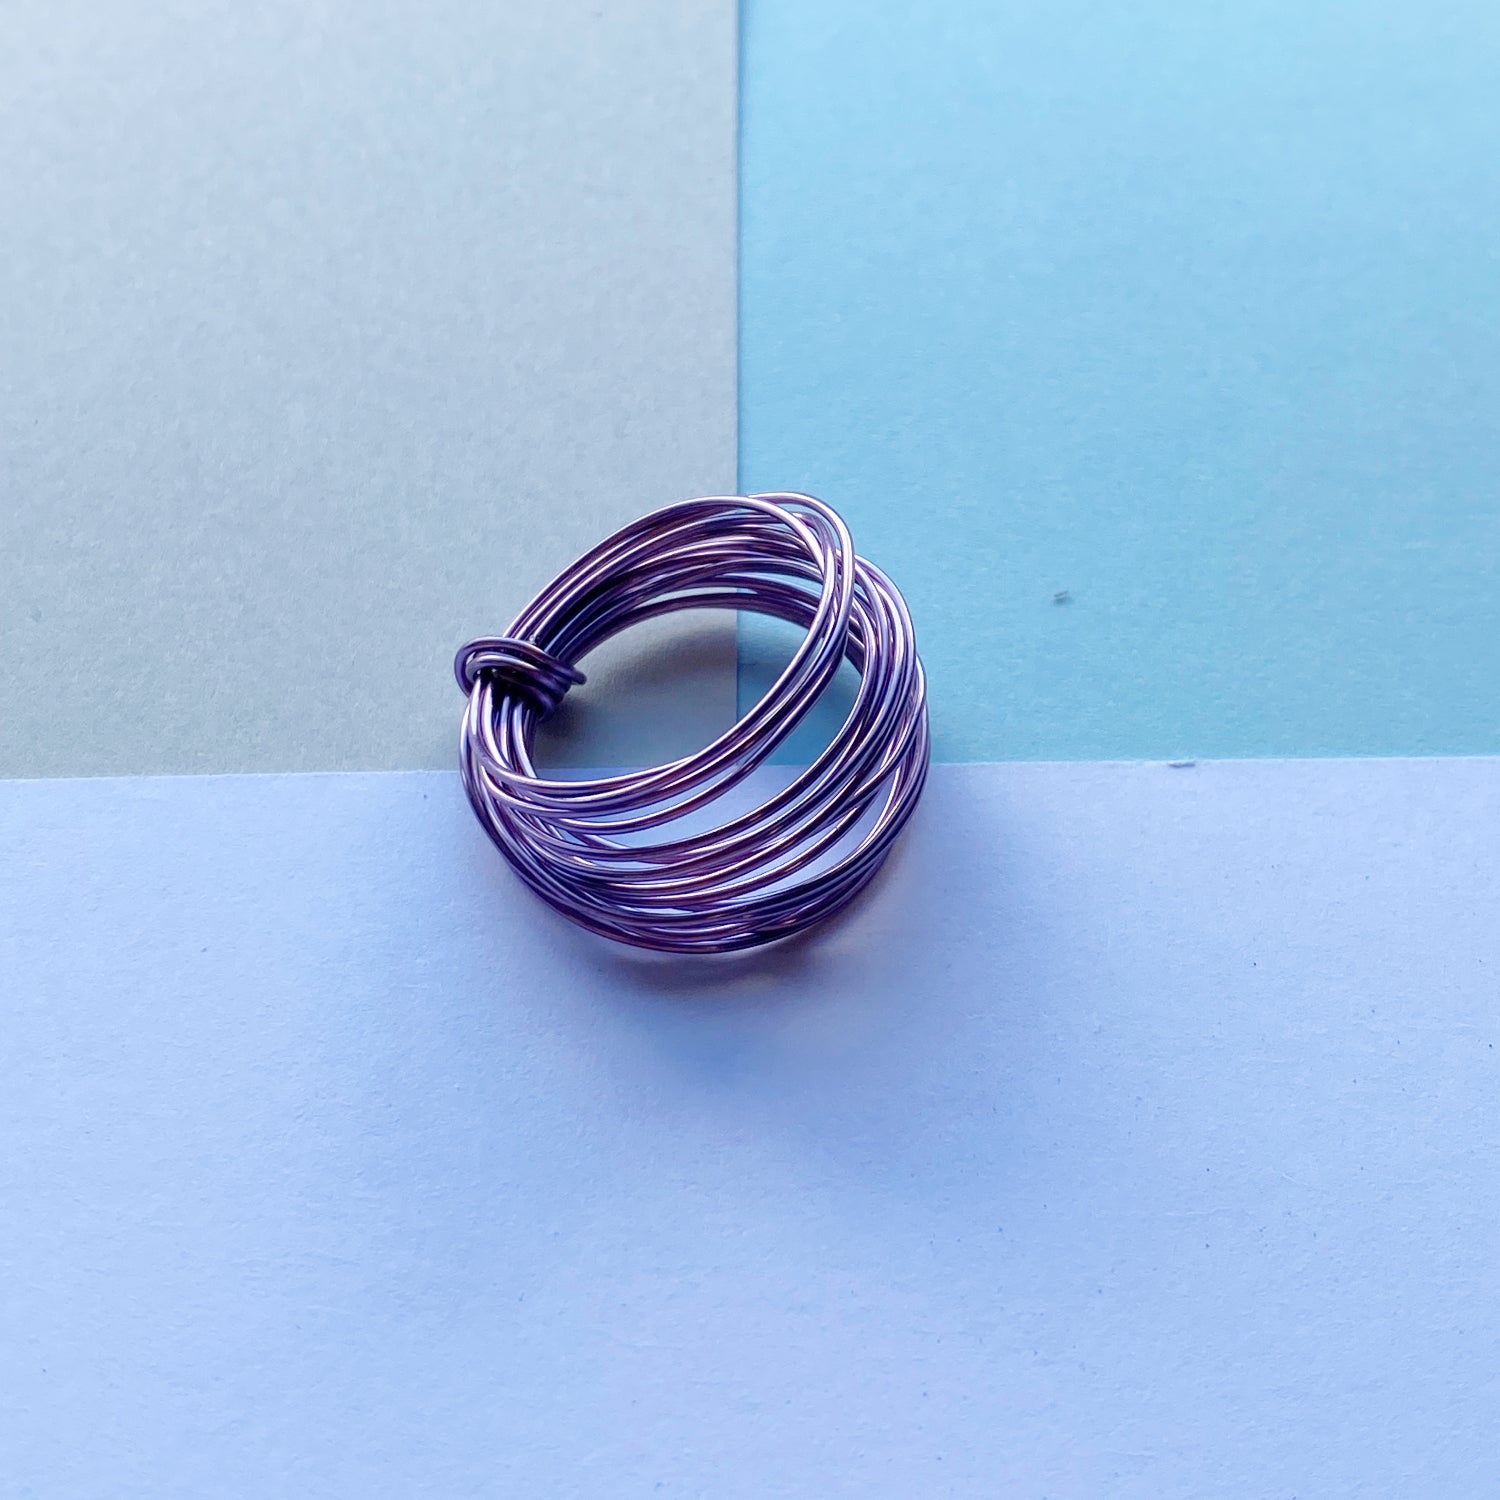 Wire Wrap Rings - Red/purple/pink - Large - The Argentum Design Co